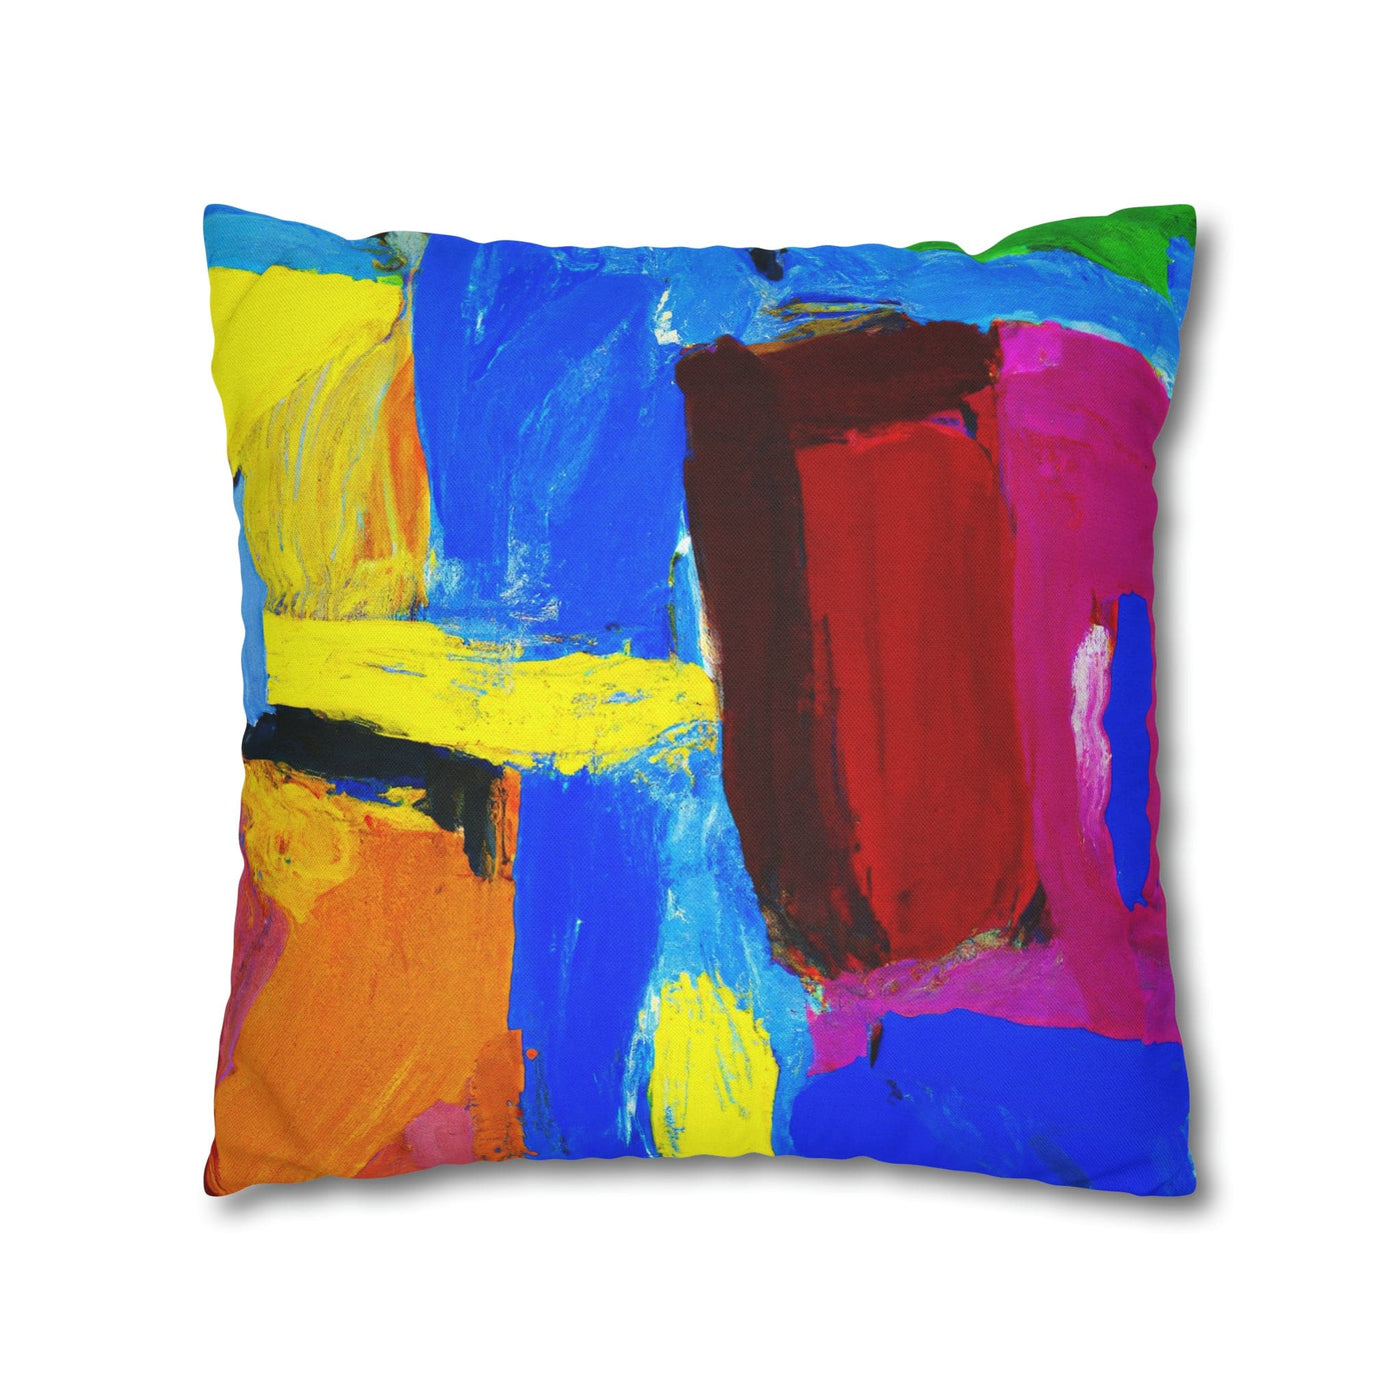 Decorative Throw Pillow Covers With Zipper - Set Of 2 Blue Red Yellow